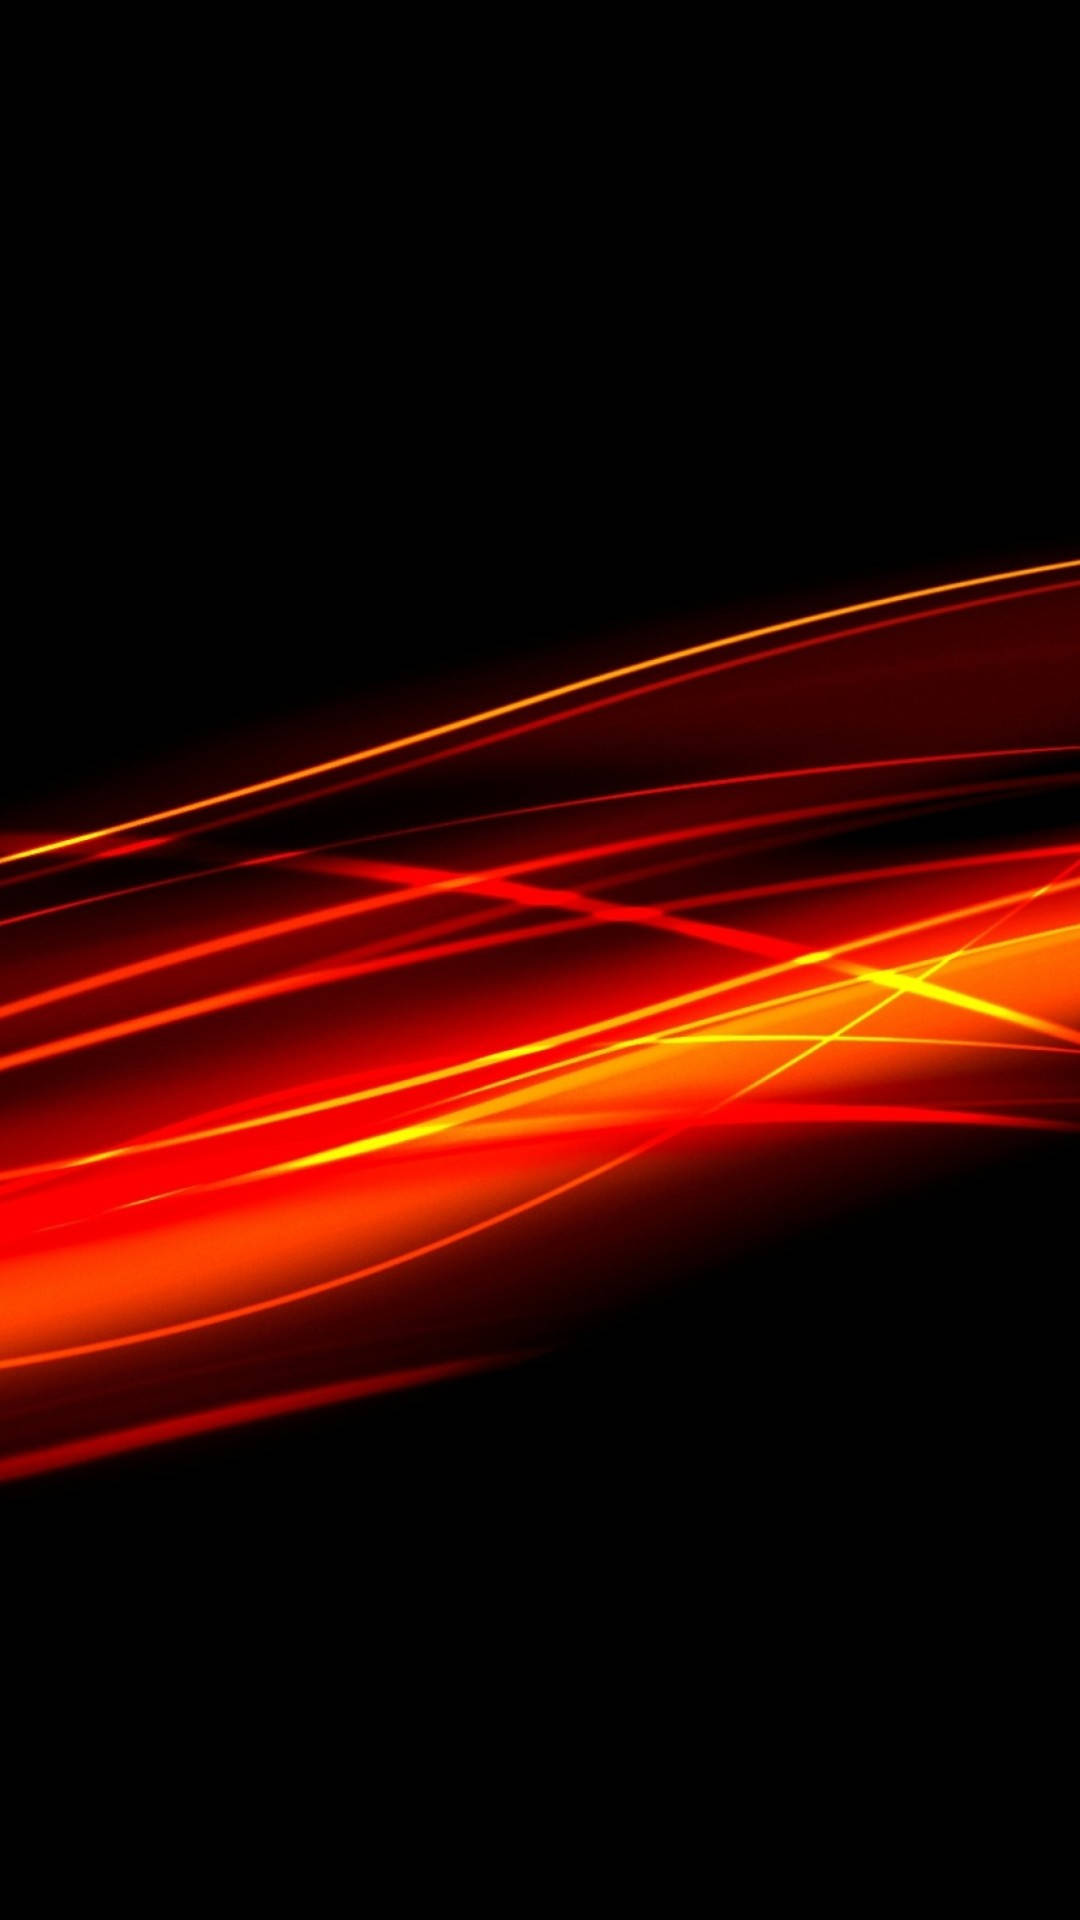 Abstract Flame Light Red Iphone Wallpaper